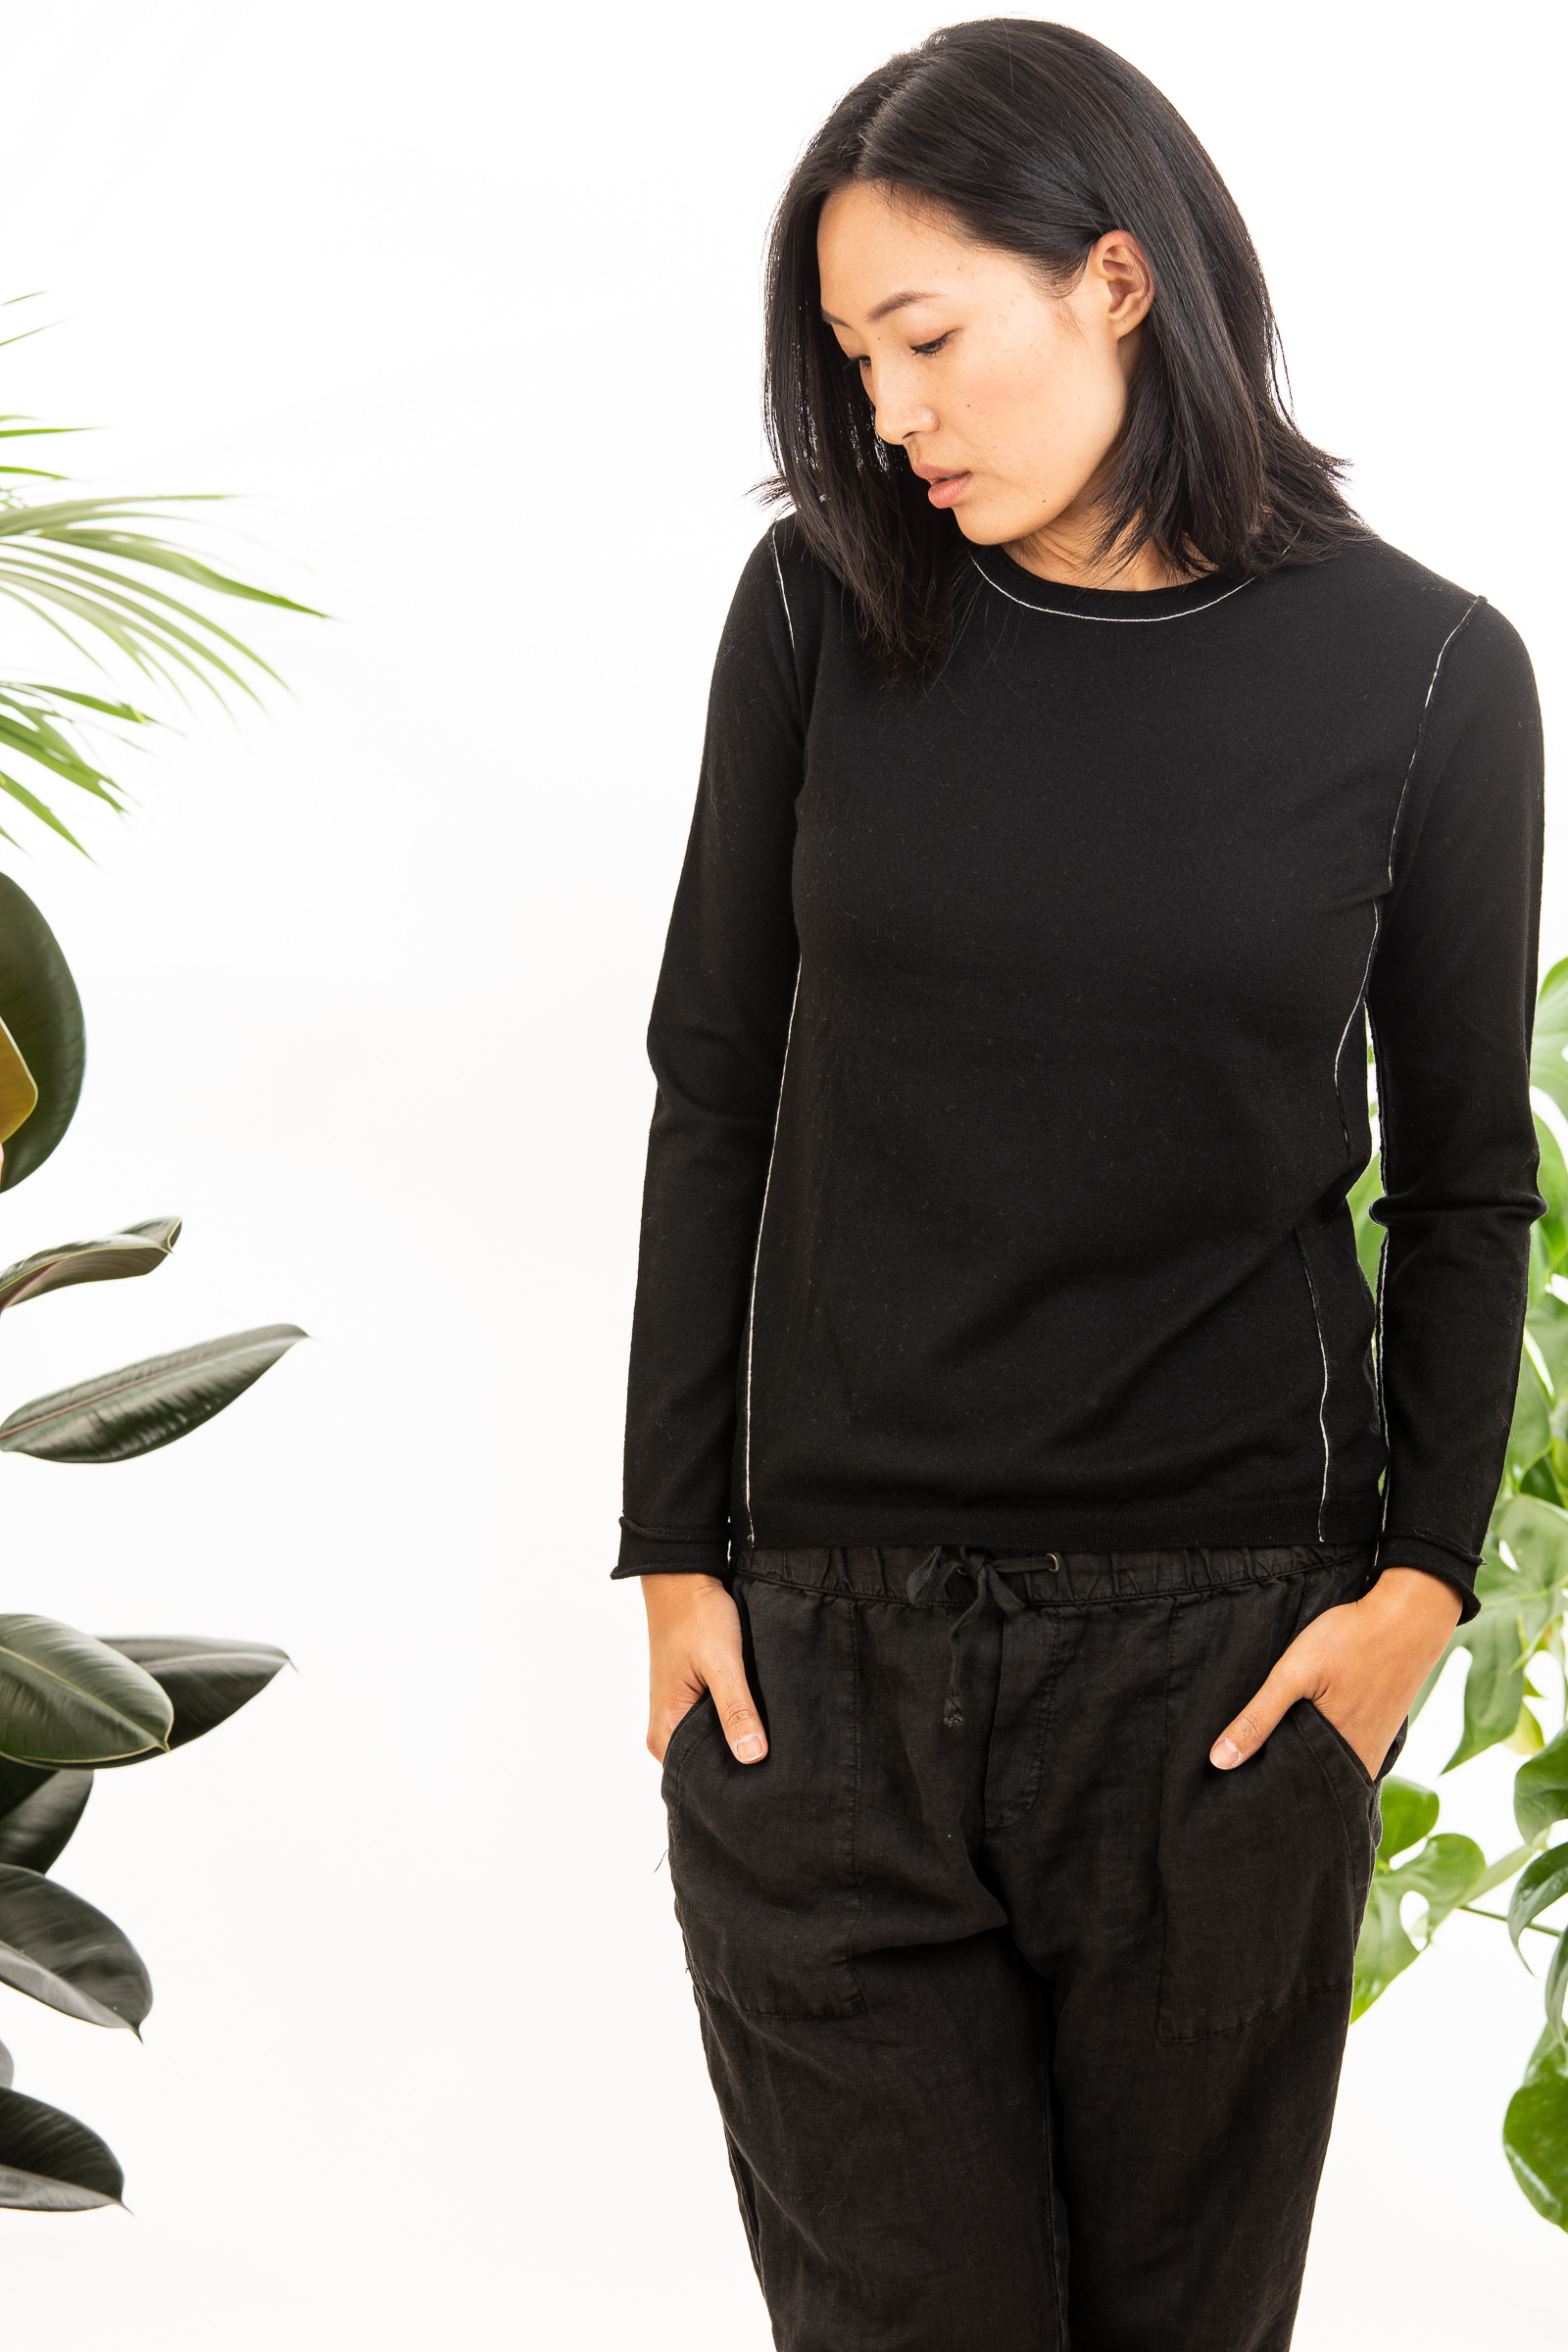 L/S Baby Tee | Worsted Cashmere | Black – Paychi Guh